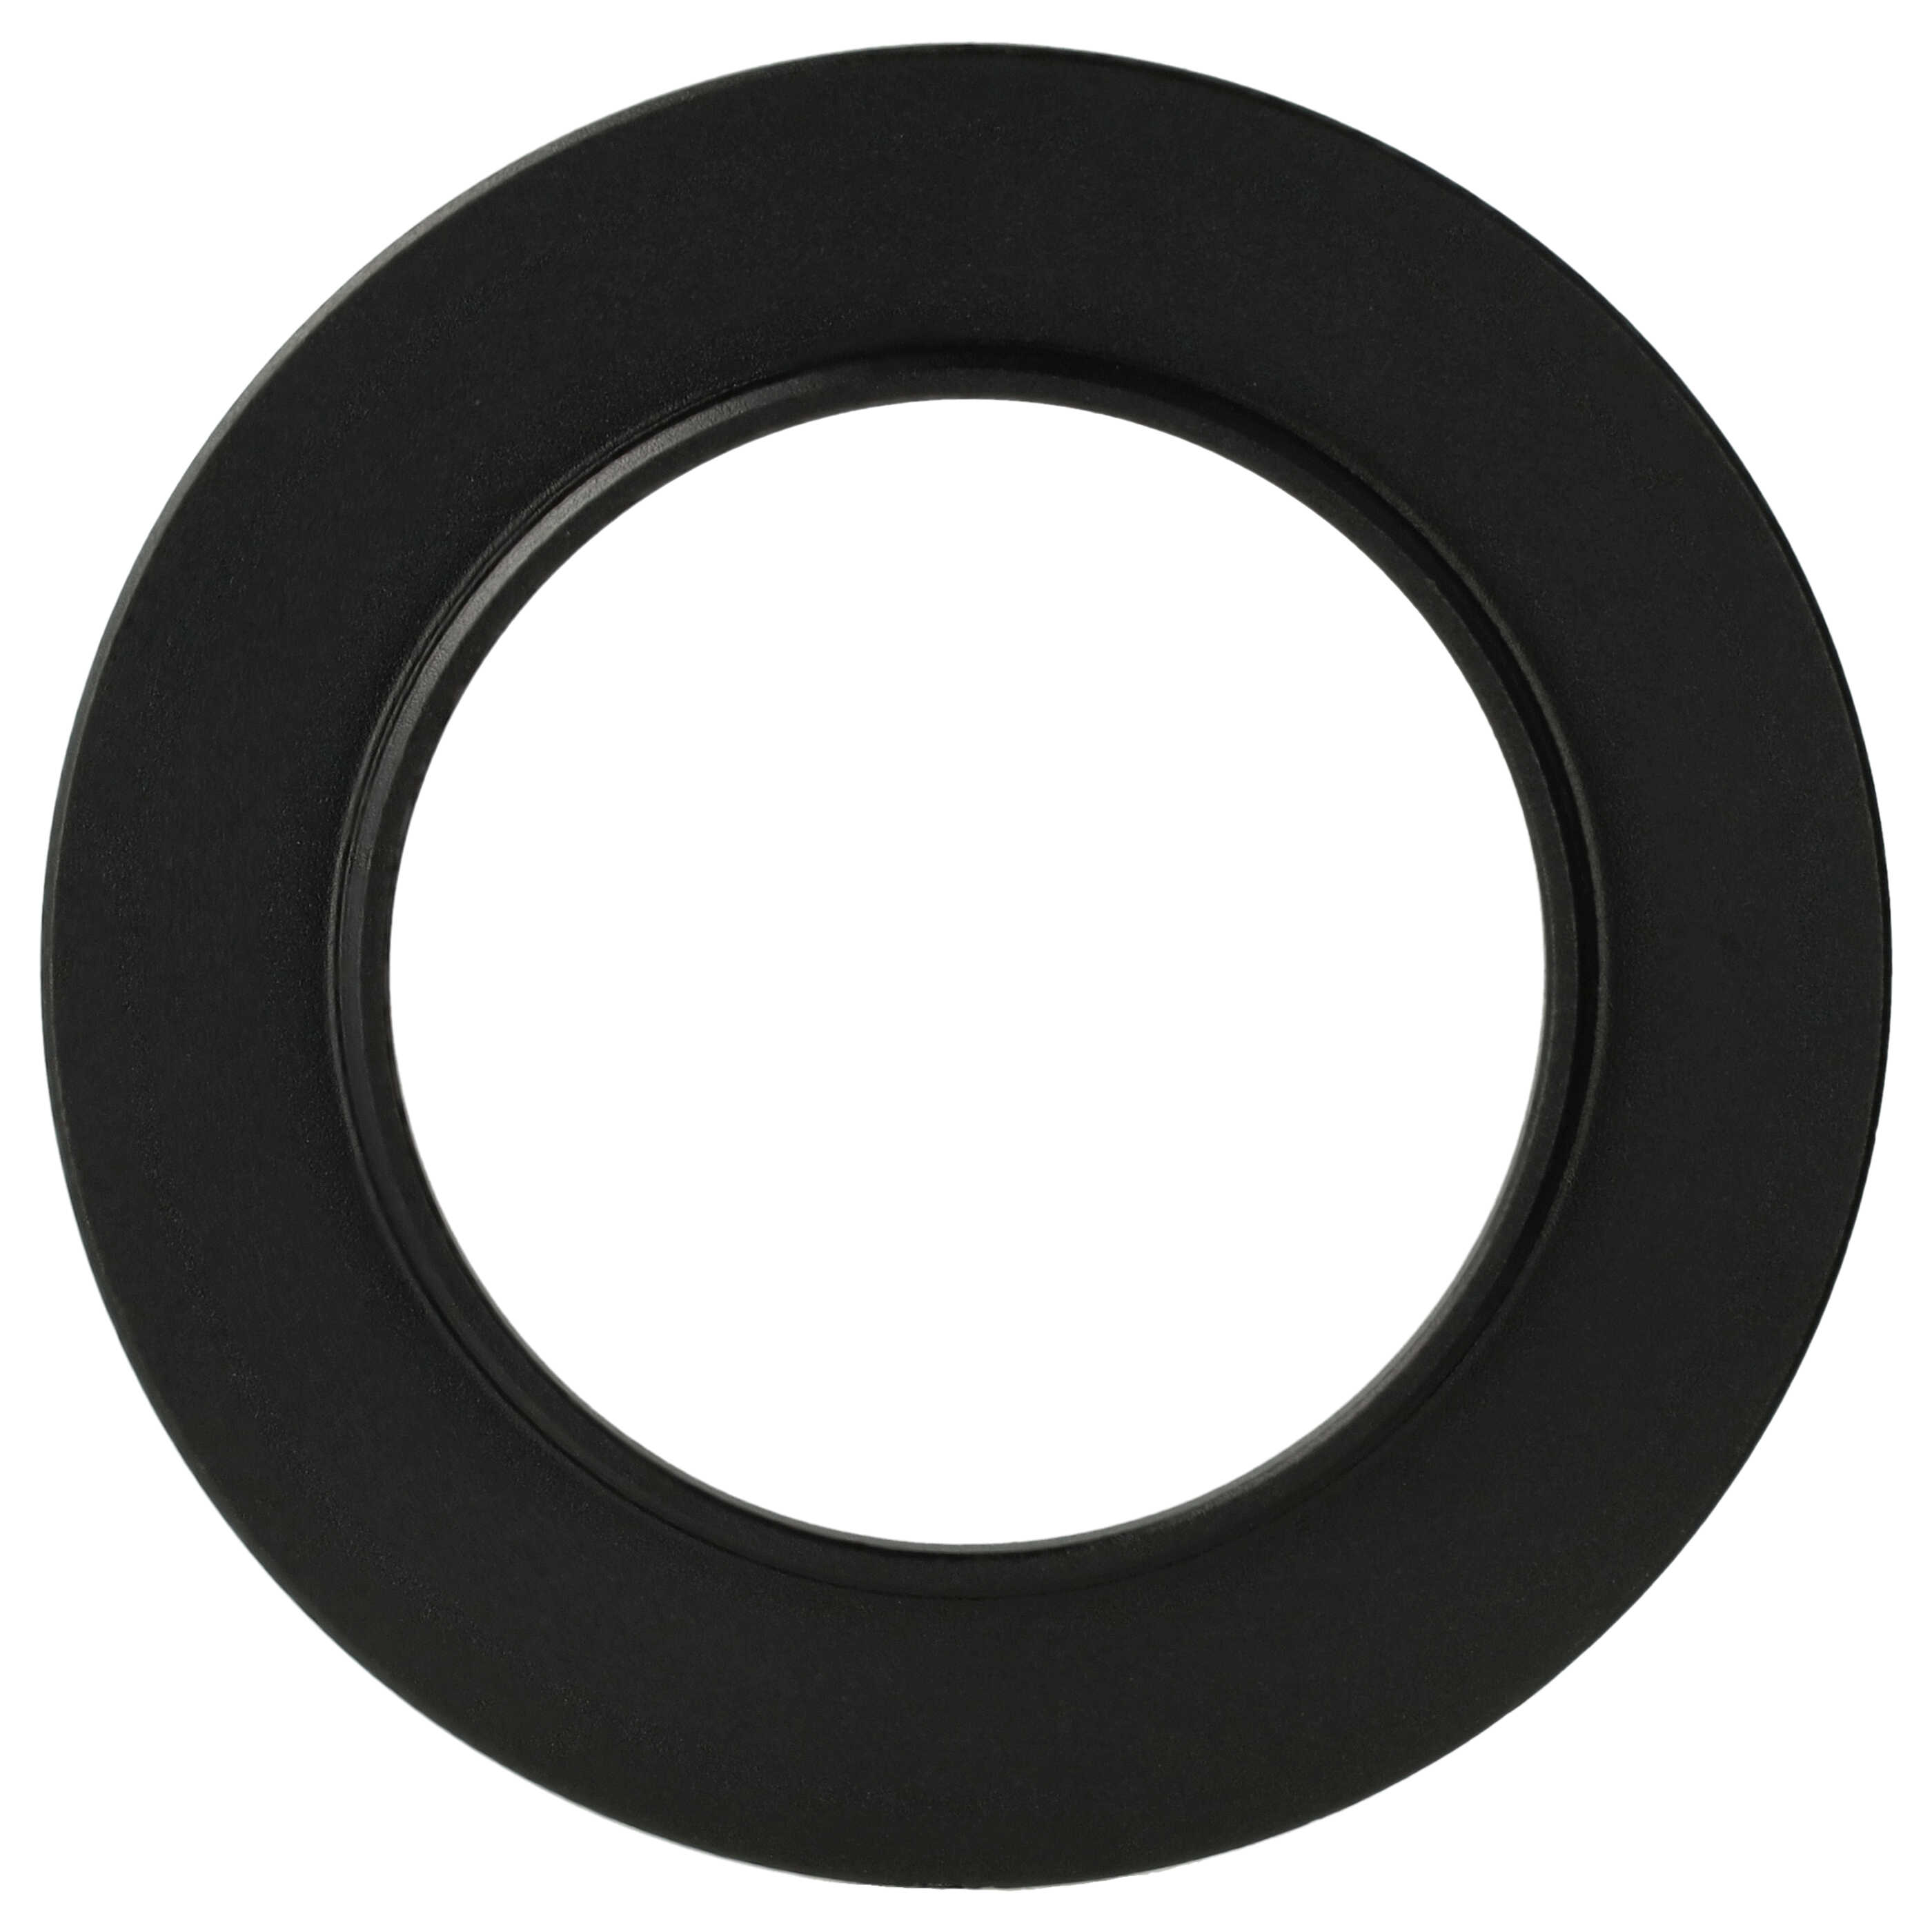 Step-Up Ring Adapter of 37 mm to 52 mmfor various Camera Lens - Filter Adapter